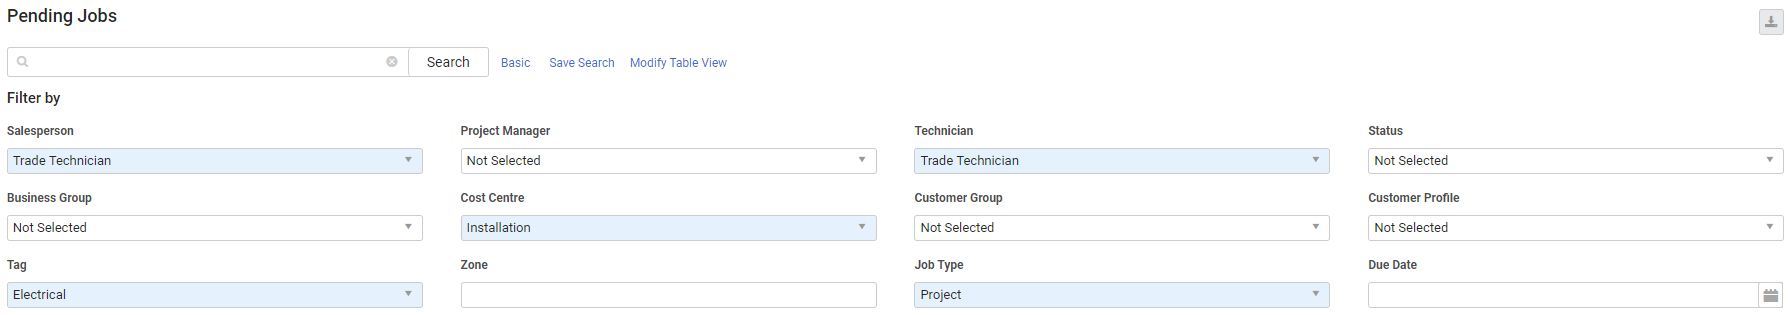 A screenshot of the filters available in the Pending Jobs table.